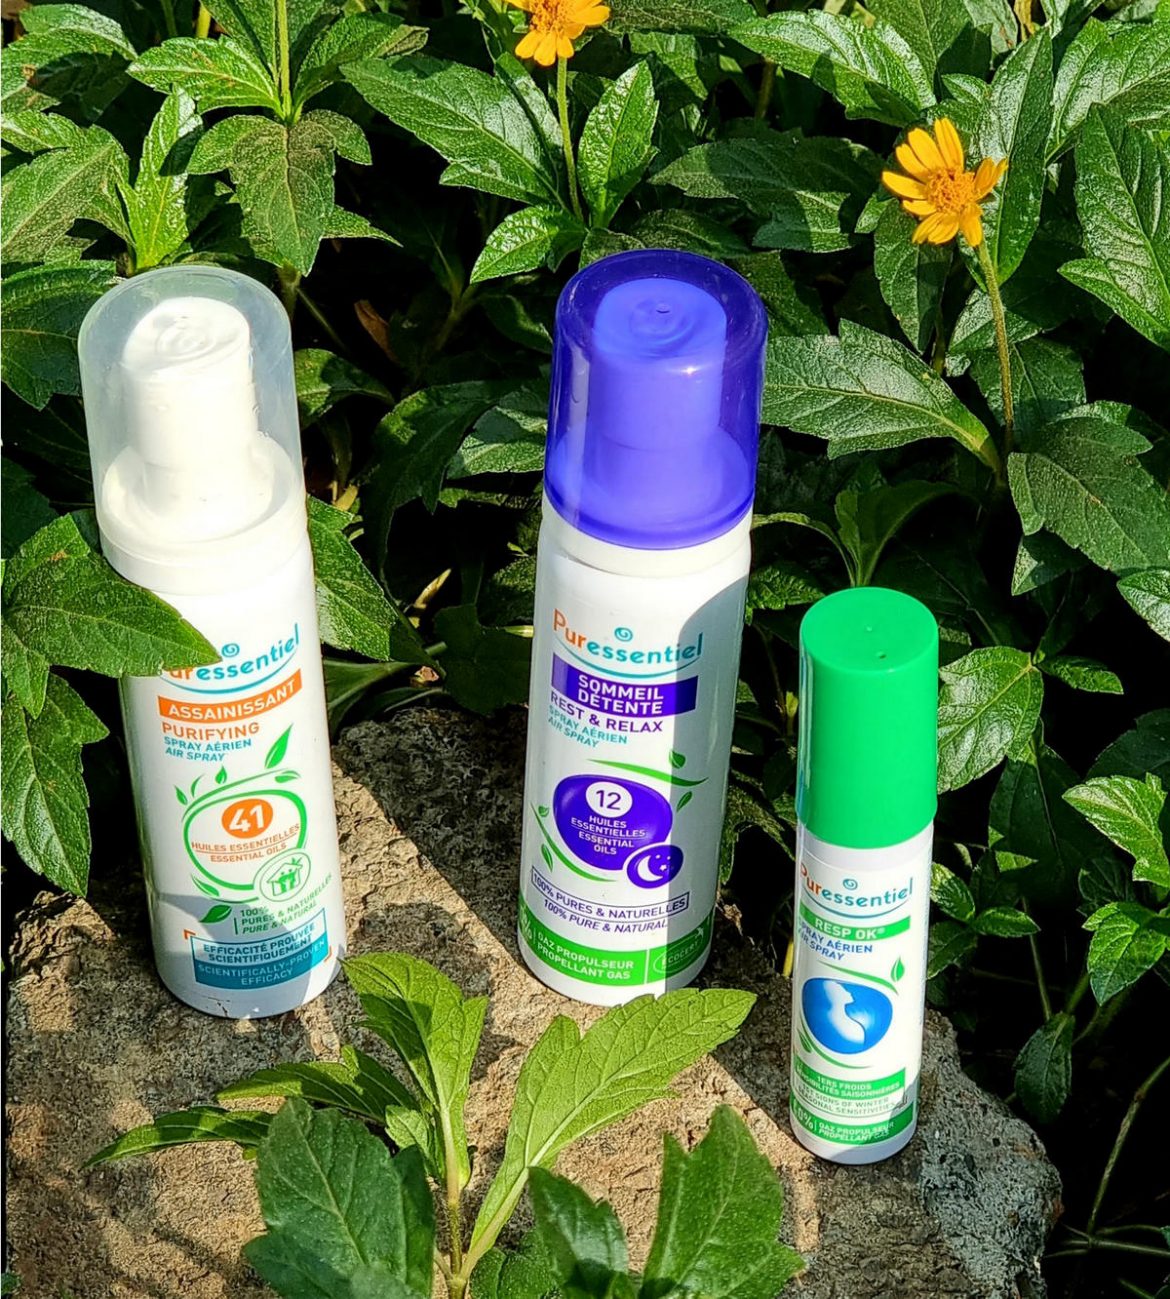 French Brand Puressentiel Comes To India With Natural, Vegan Aromatherapy Solution Sprays That Soothe, Care And Enrich Daily Life